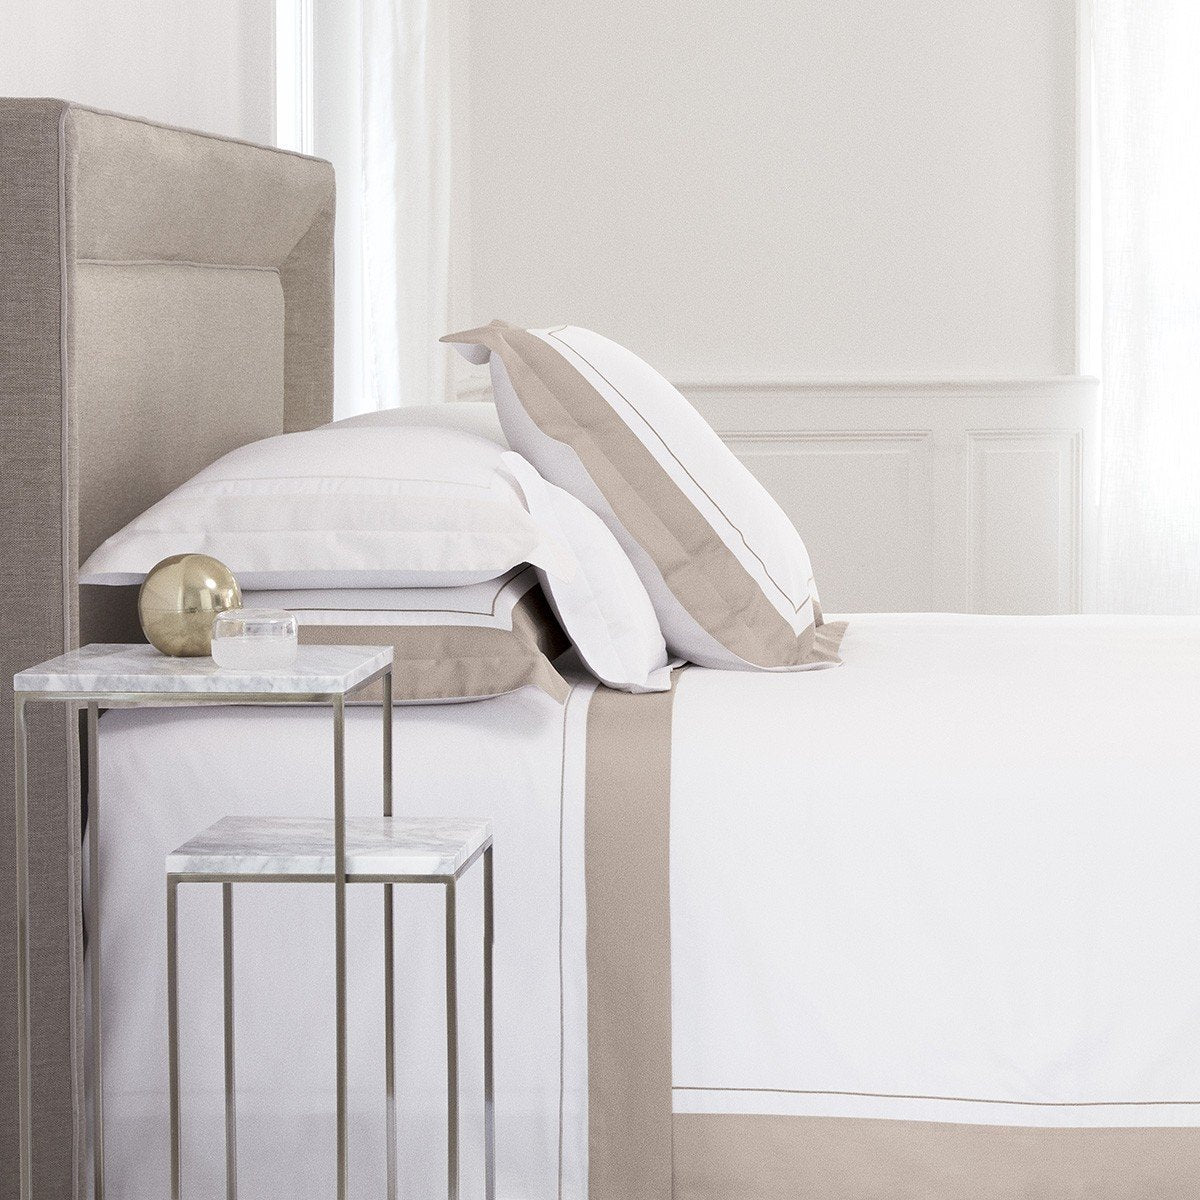 Lutece Pierre Bedding by Yves Delorme | Fig Linens - White, cotton, sheets, shams, duvet cover